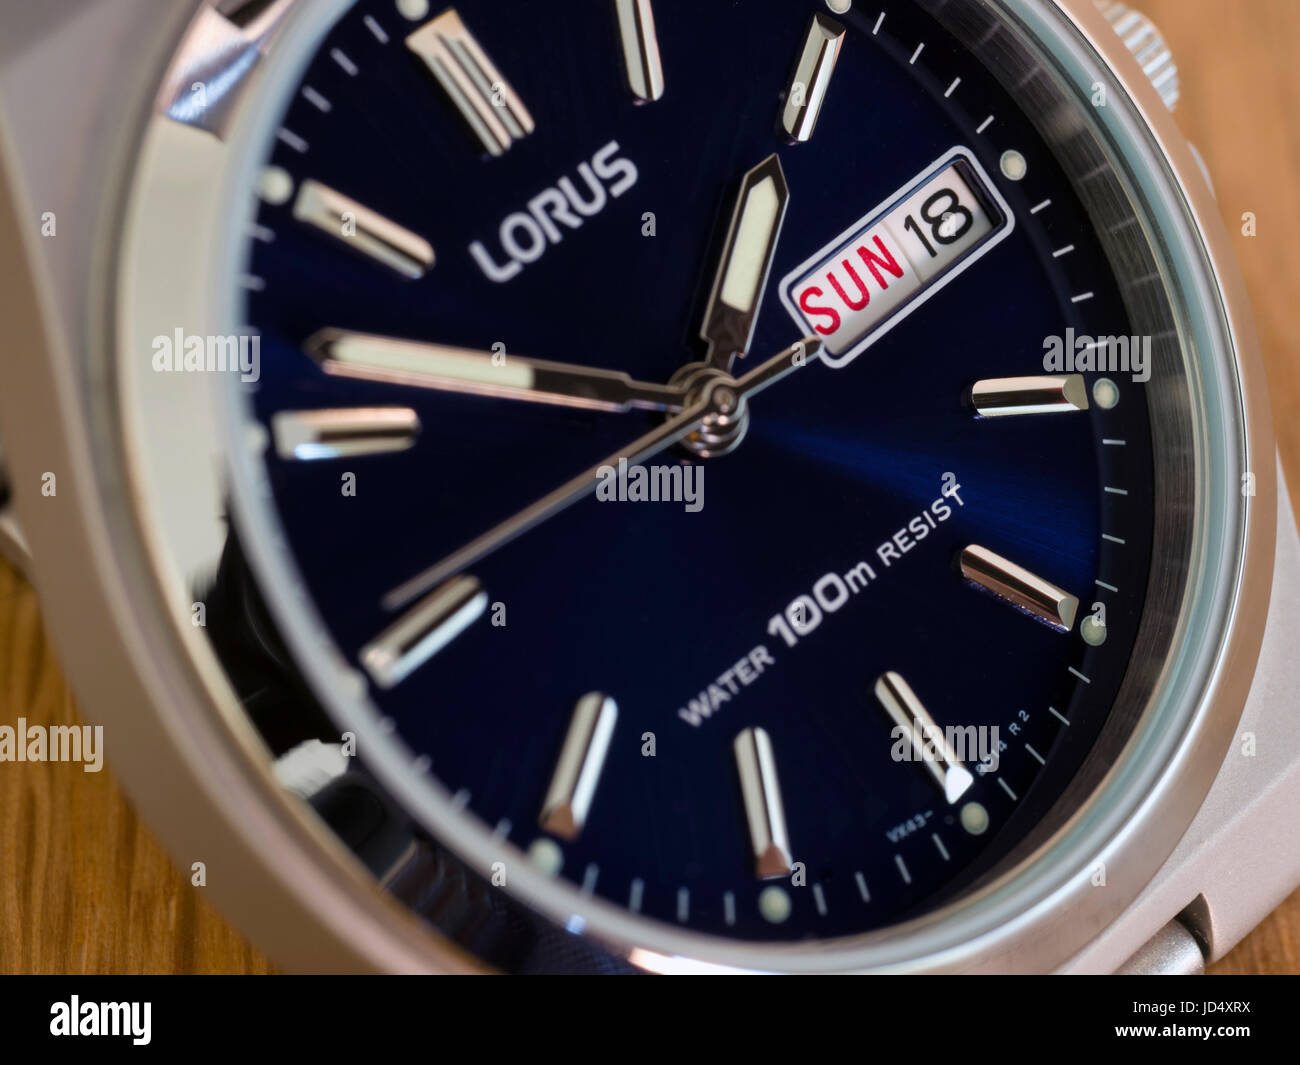 Men's Lorus analogue wristwatch, watch with deep blue face, day and date display and stainless steel case. Stock Photo